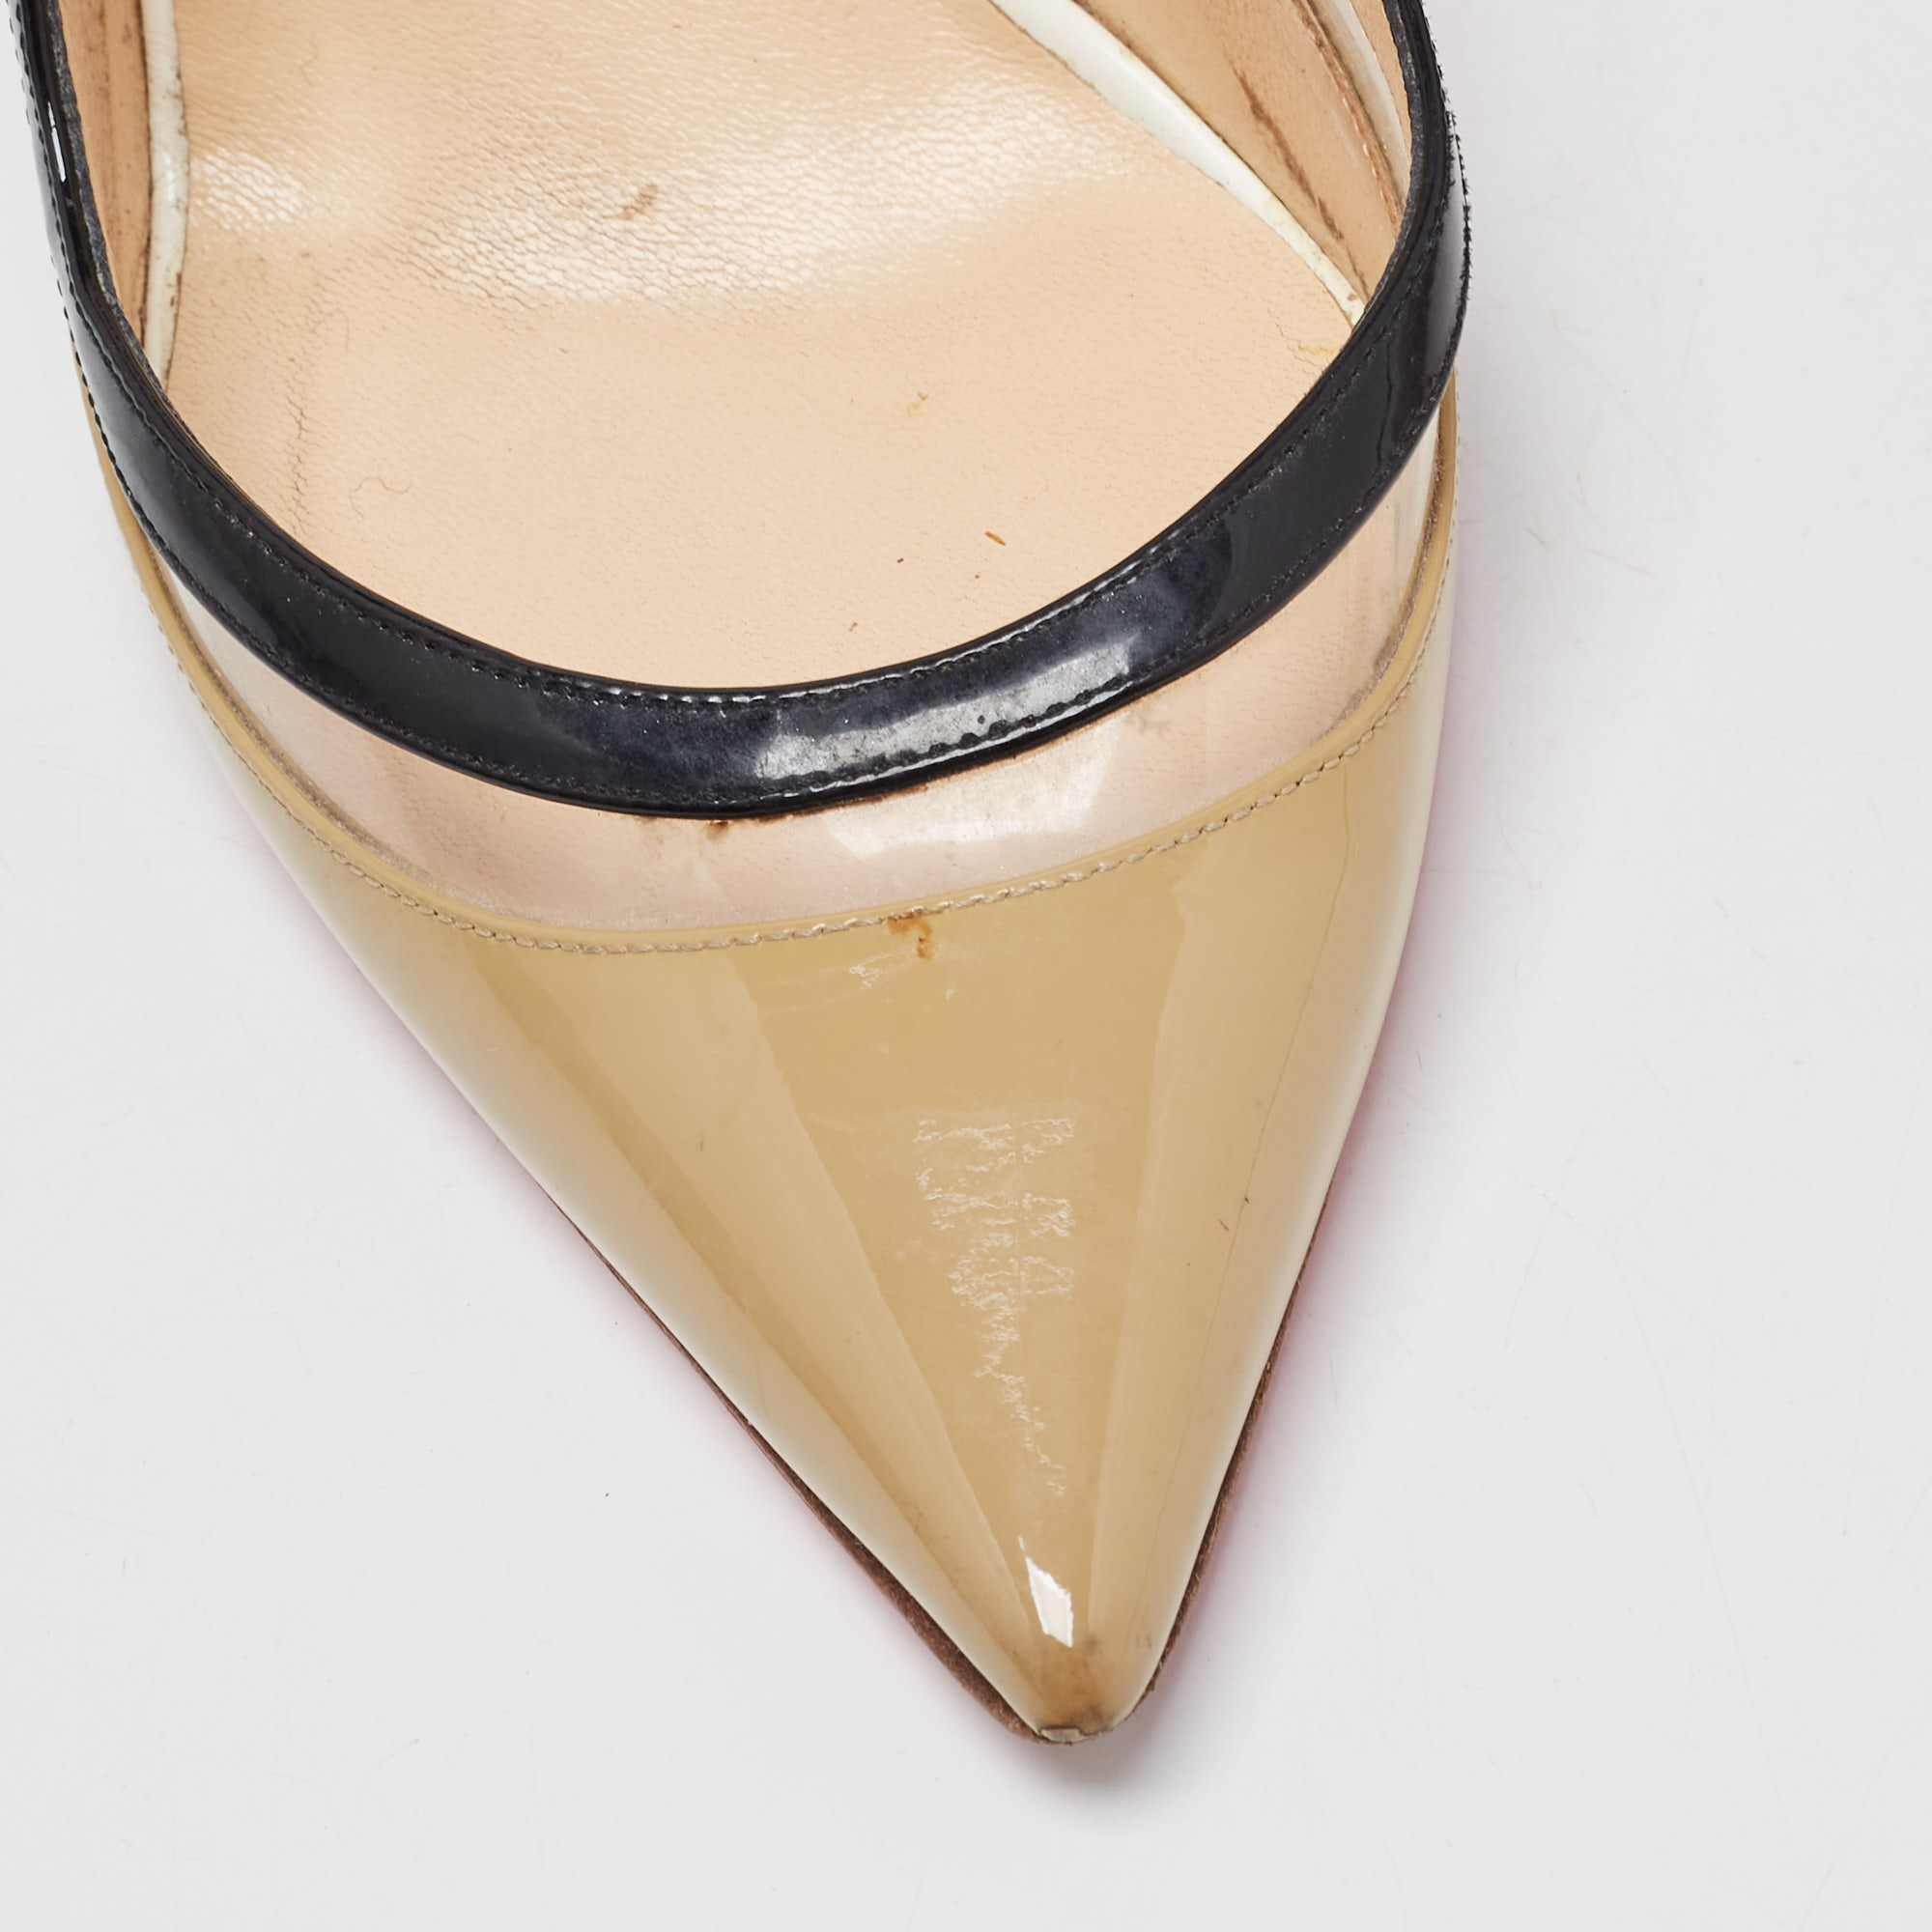 Christian Louboutin Tricolor Patent Leather And PVC Paulina Slingback Pumps Size 38